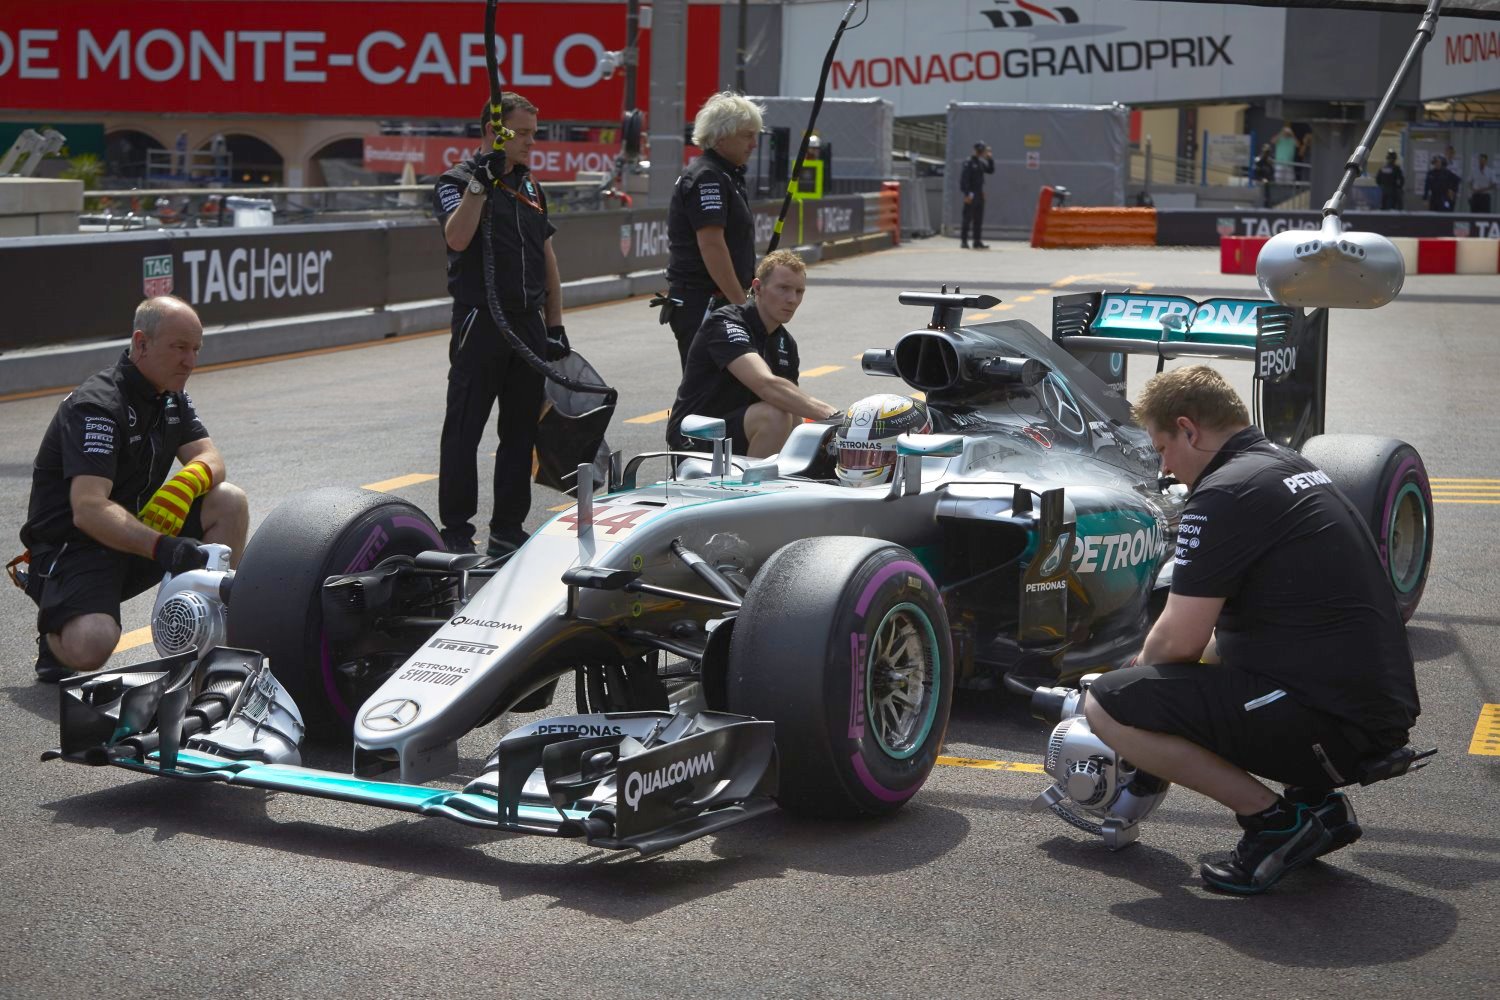 The Mercedes will fly in Monaco